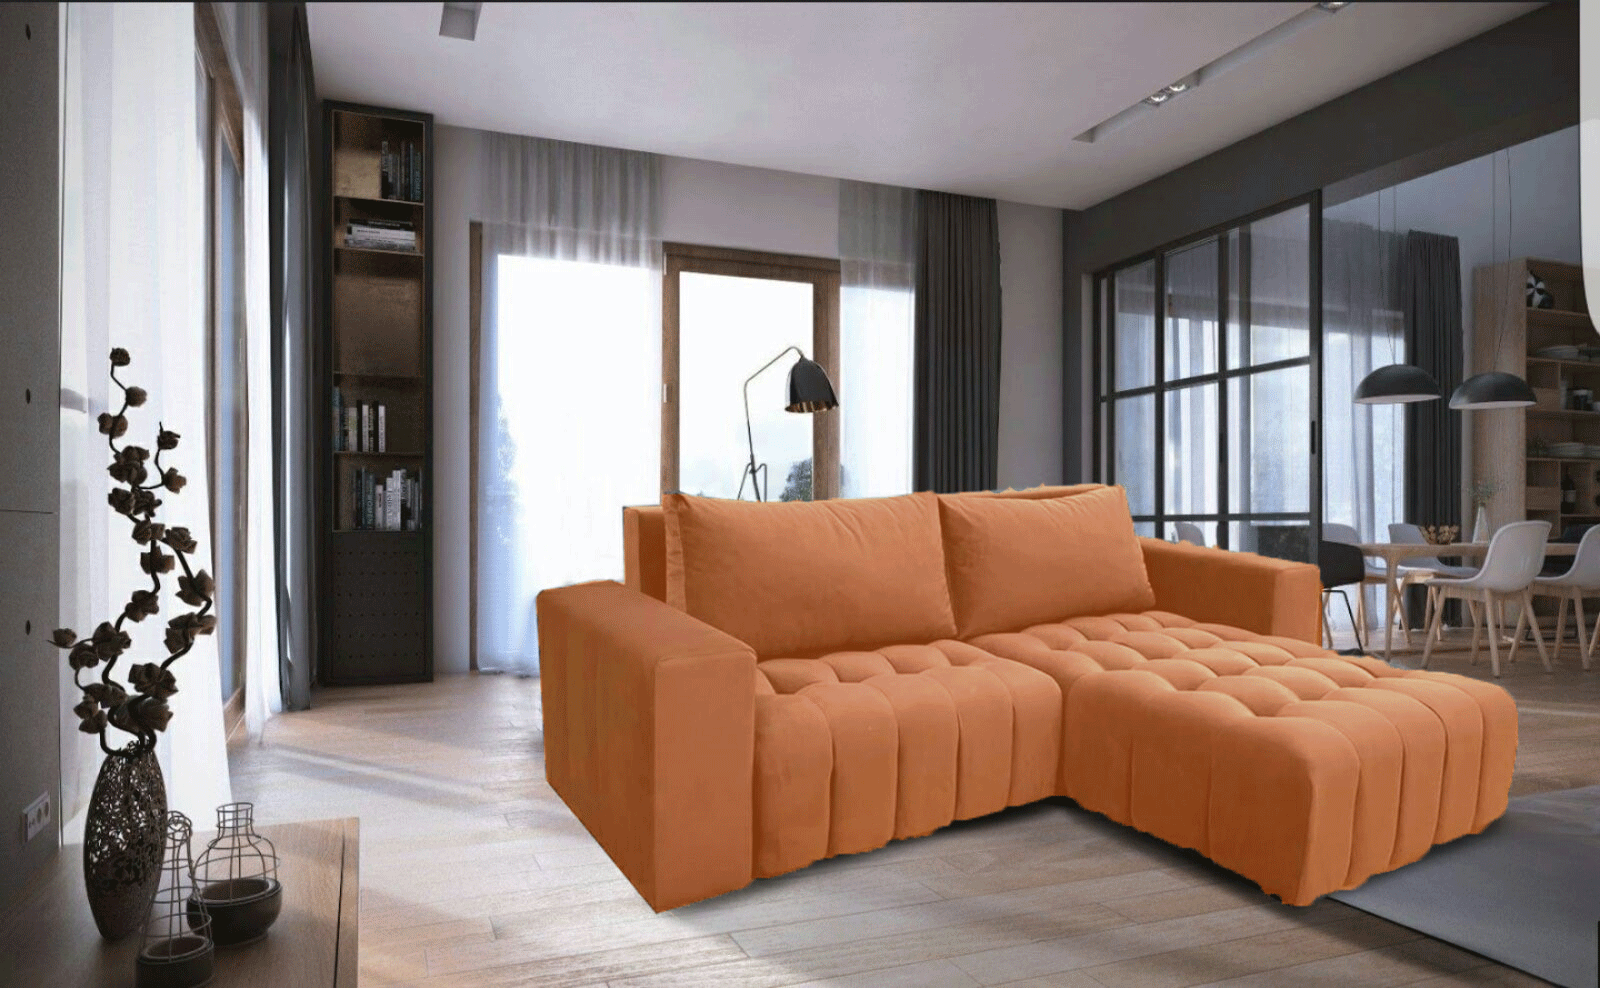 Living Room Furniture Sofas Loveseats and Chairs Neo sofa bed w/ storage Orange